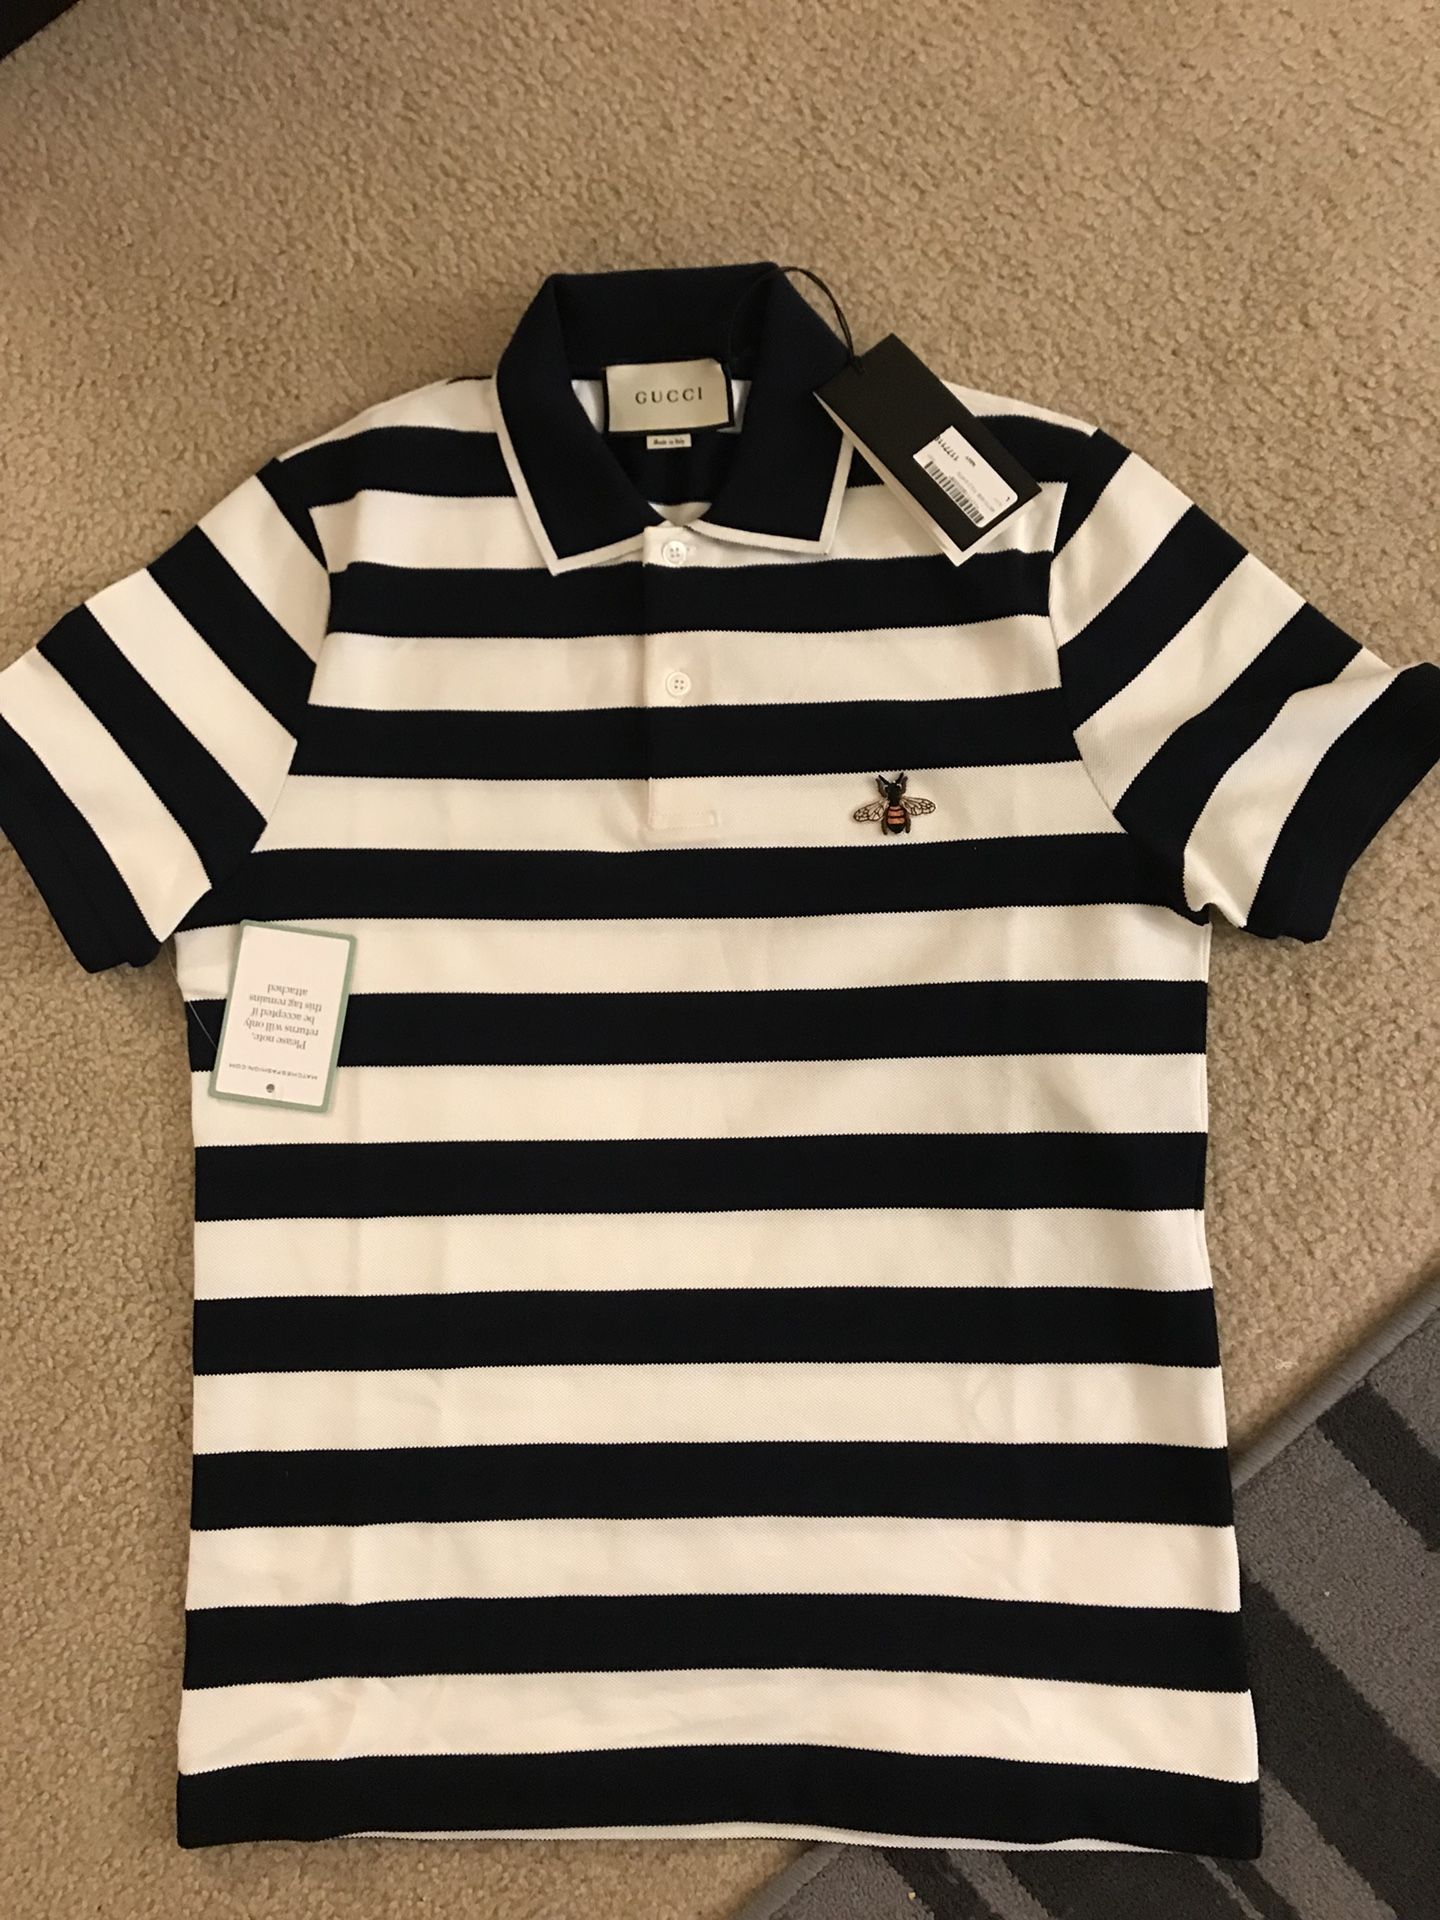 Gucci polo shirts with bee size XL